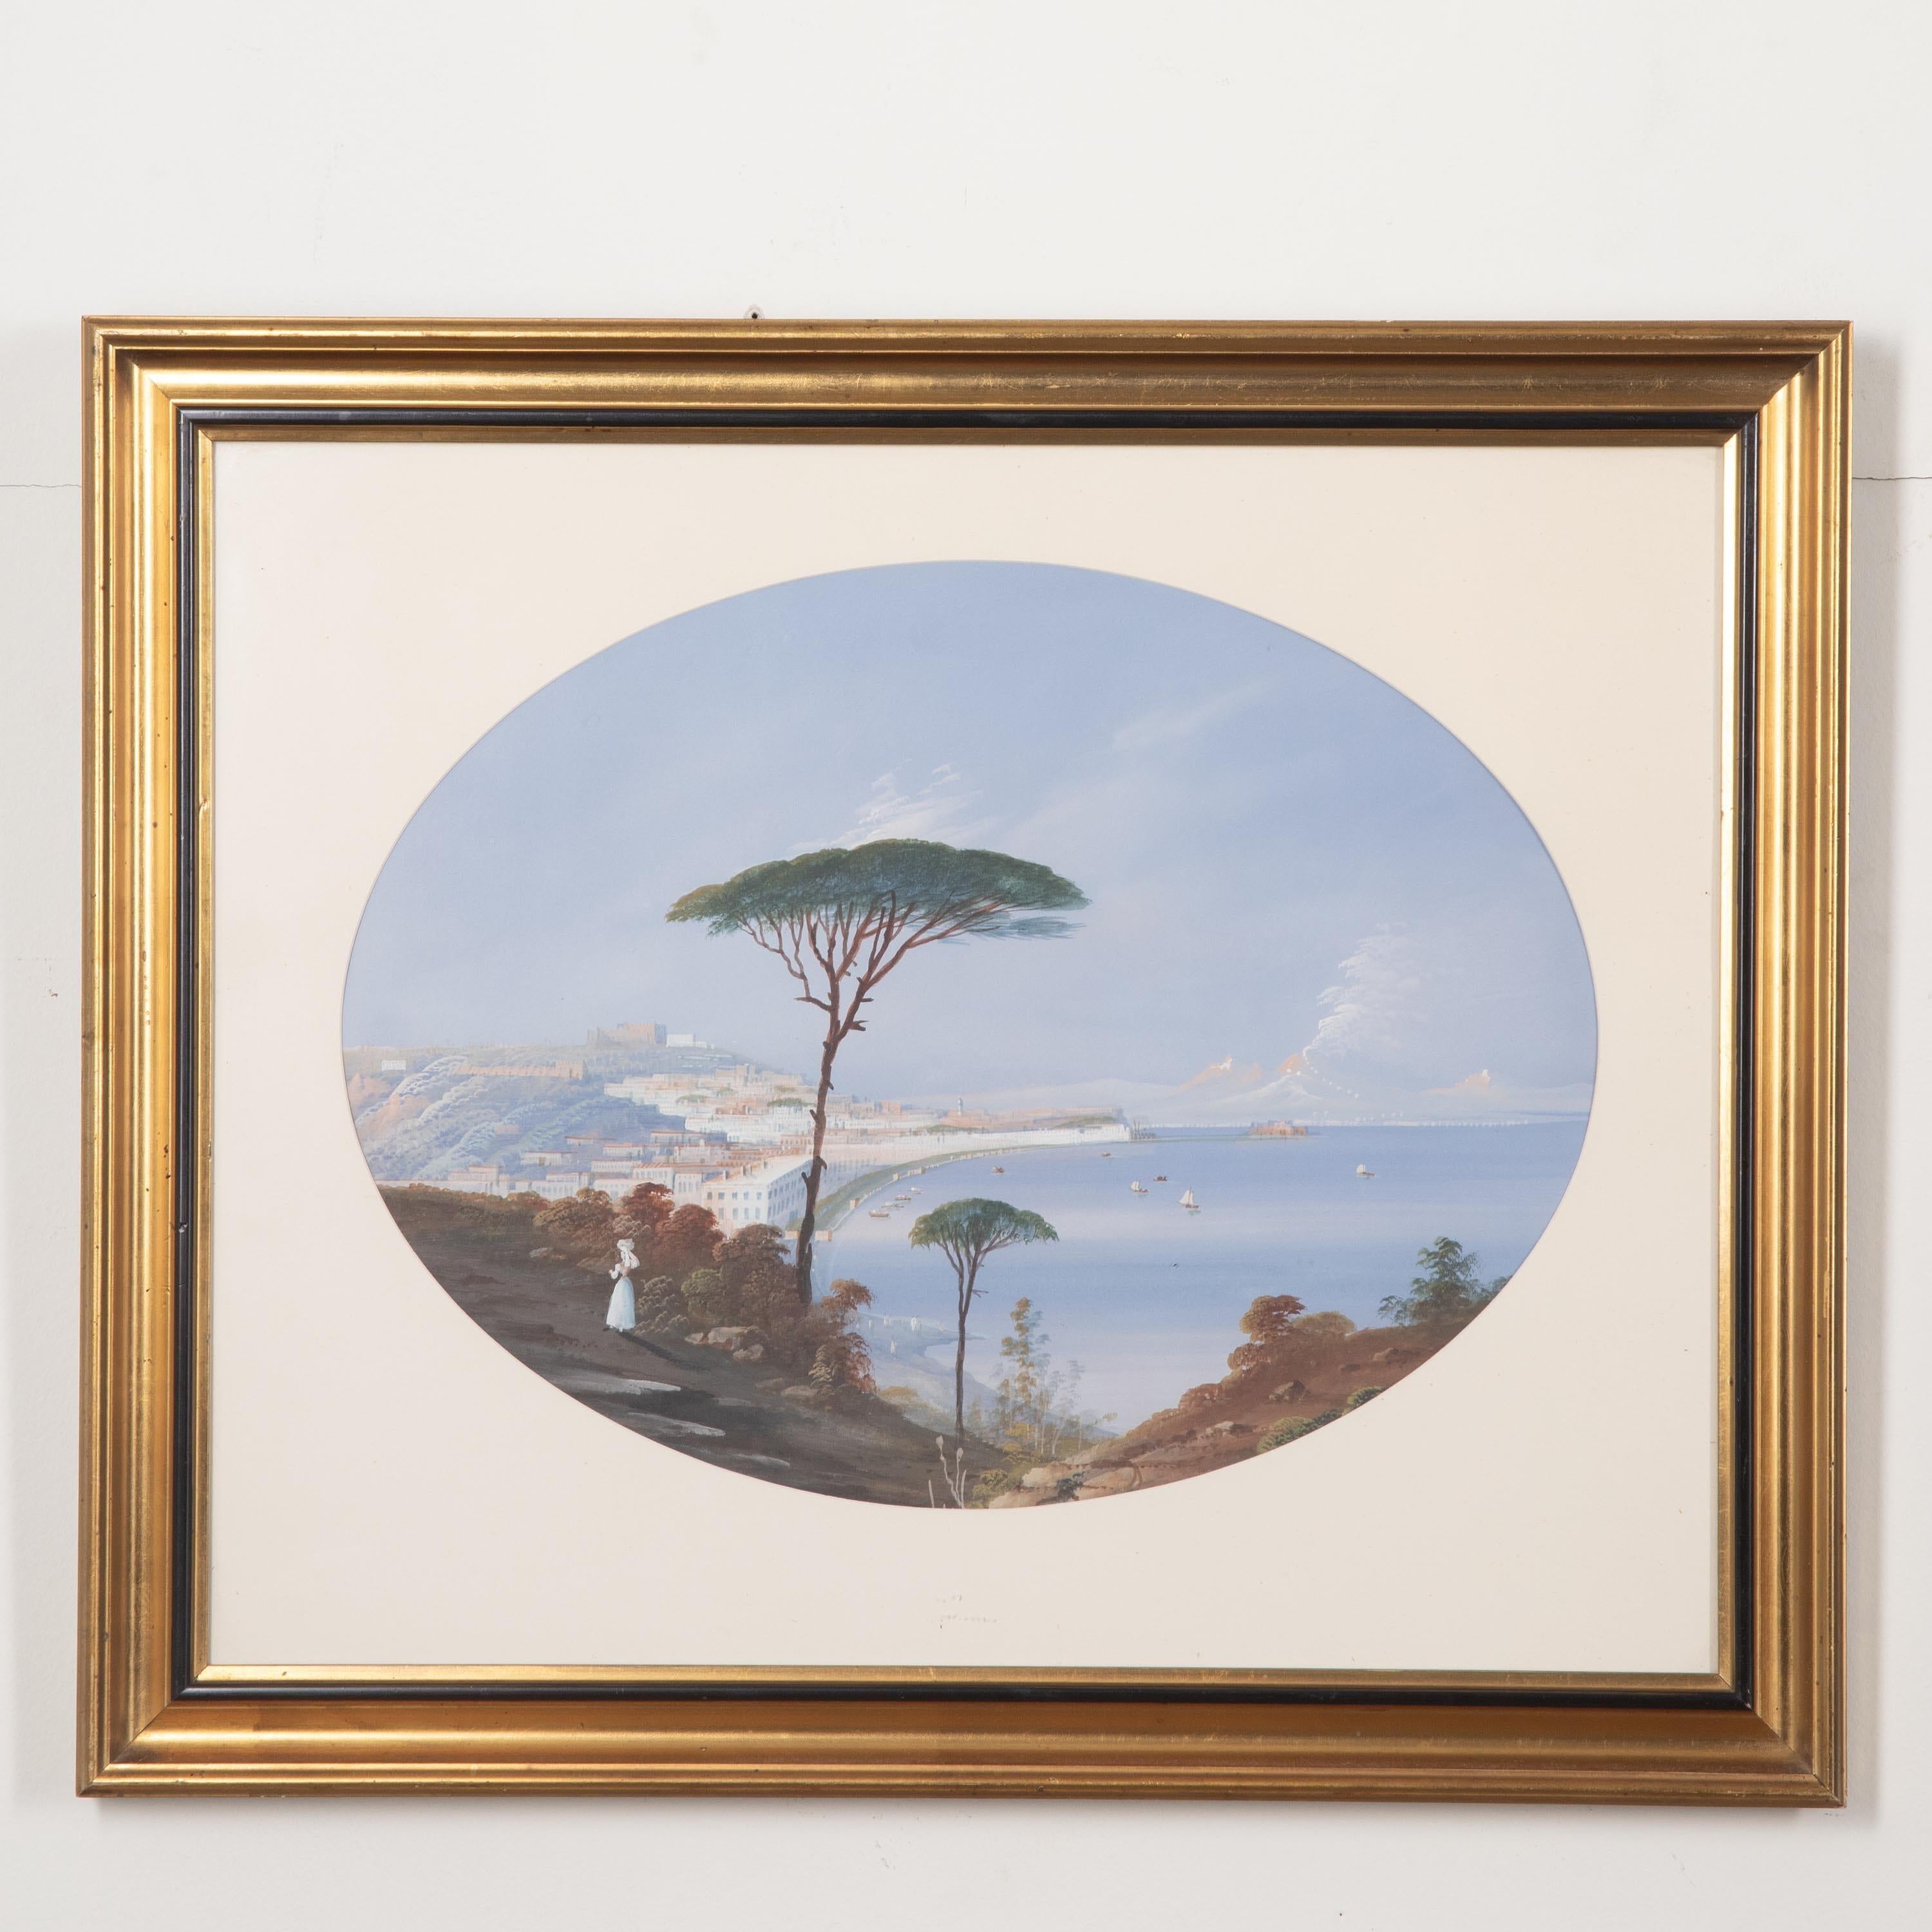 An early C19th pair of finely detailed gouaches, depicting unusual scenes of the bays of Naples and Sorrento. In charming light colours and excellent condition. Circa 1820.

H: 45 cm (17 3/4